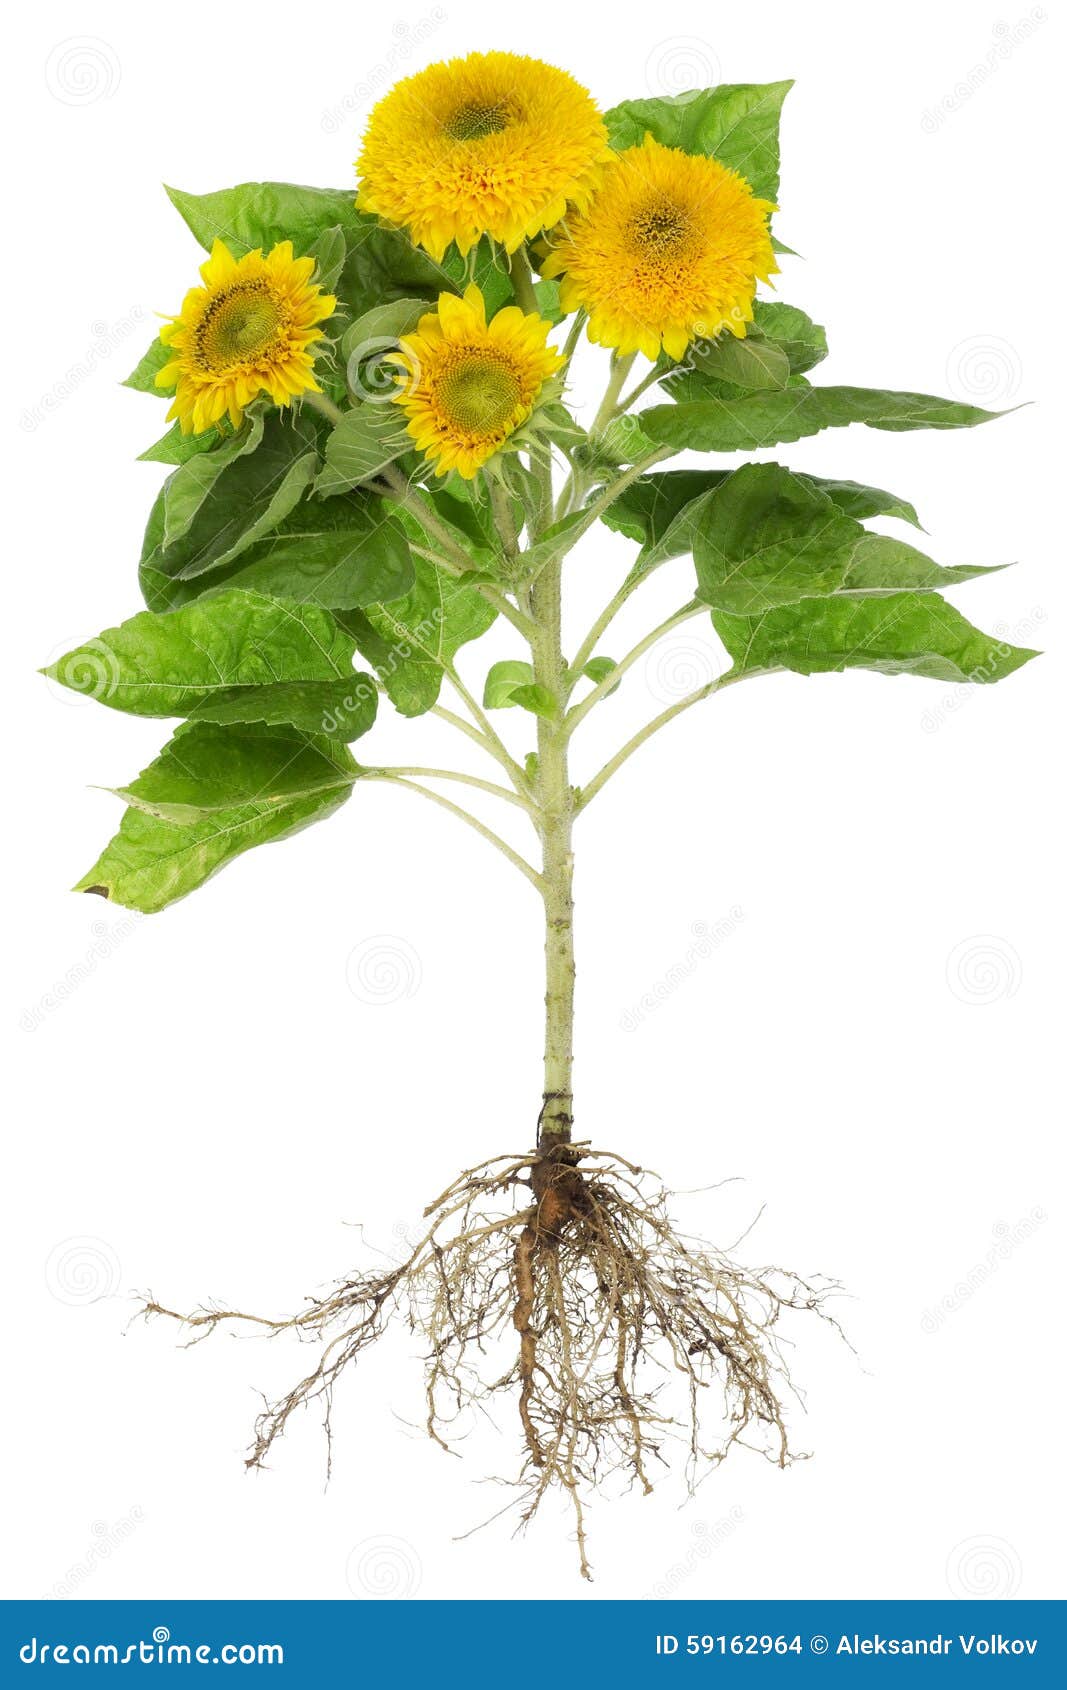 flower with roots clipart - photo #46